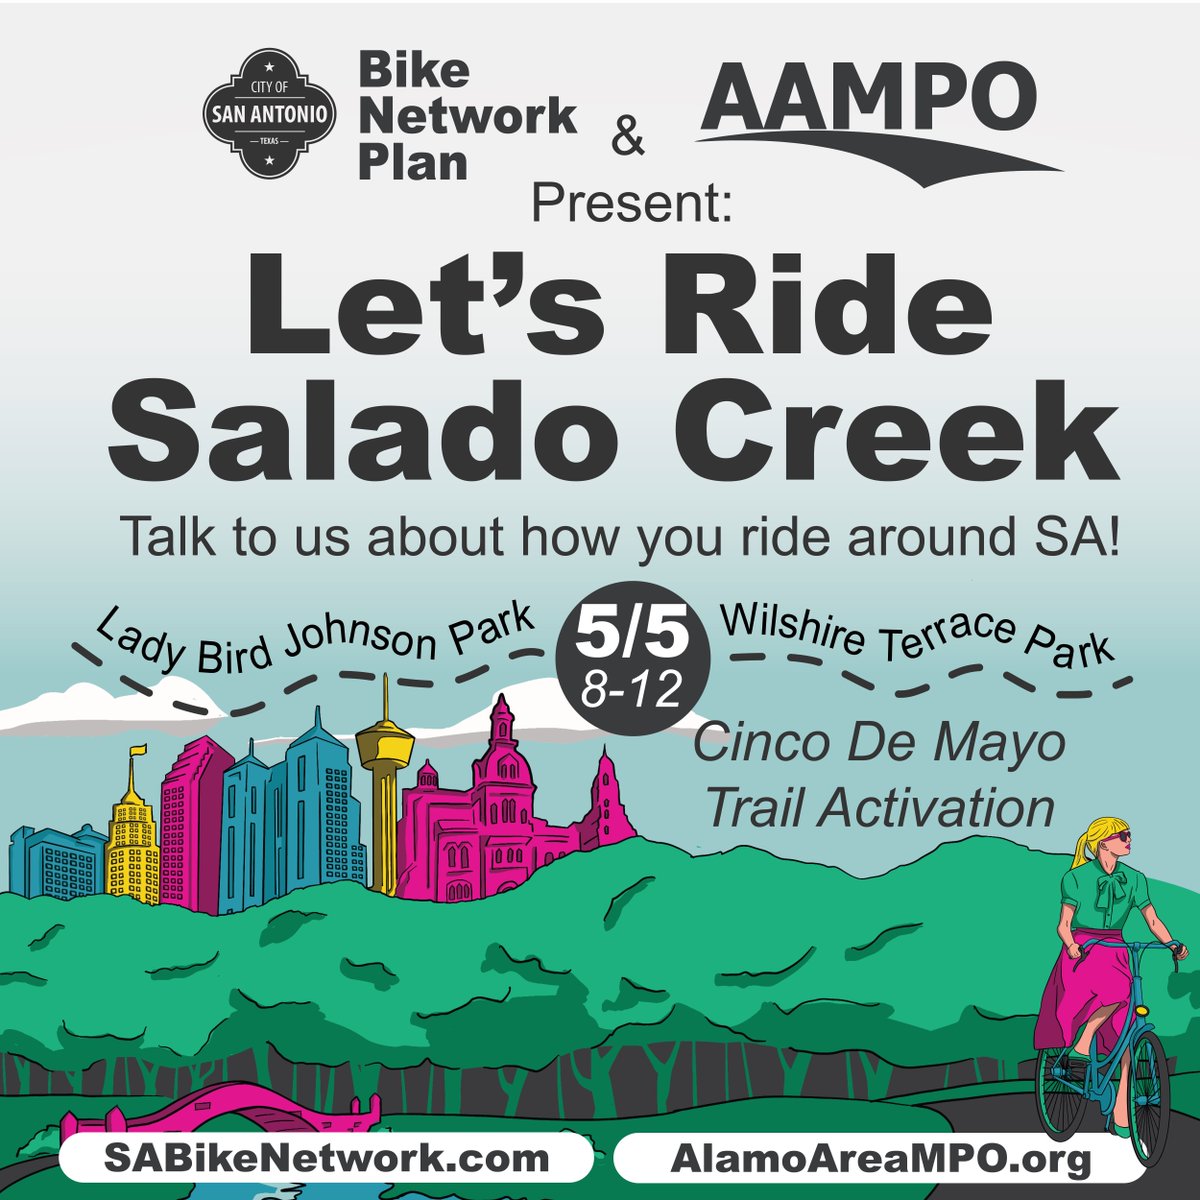 🚴‍♂️🌳 TODAY at 8AM-NOON!!! Join us for a fun bike ride & help shape the future of biking in San Antonio! Let's create safer, connected bike lanes together. See you at Wilshire Terrace and Lady Bird Johnson parks! #LetsRideSA #COSATransportation